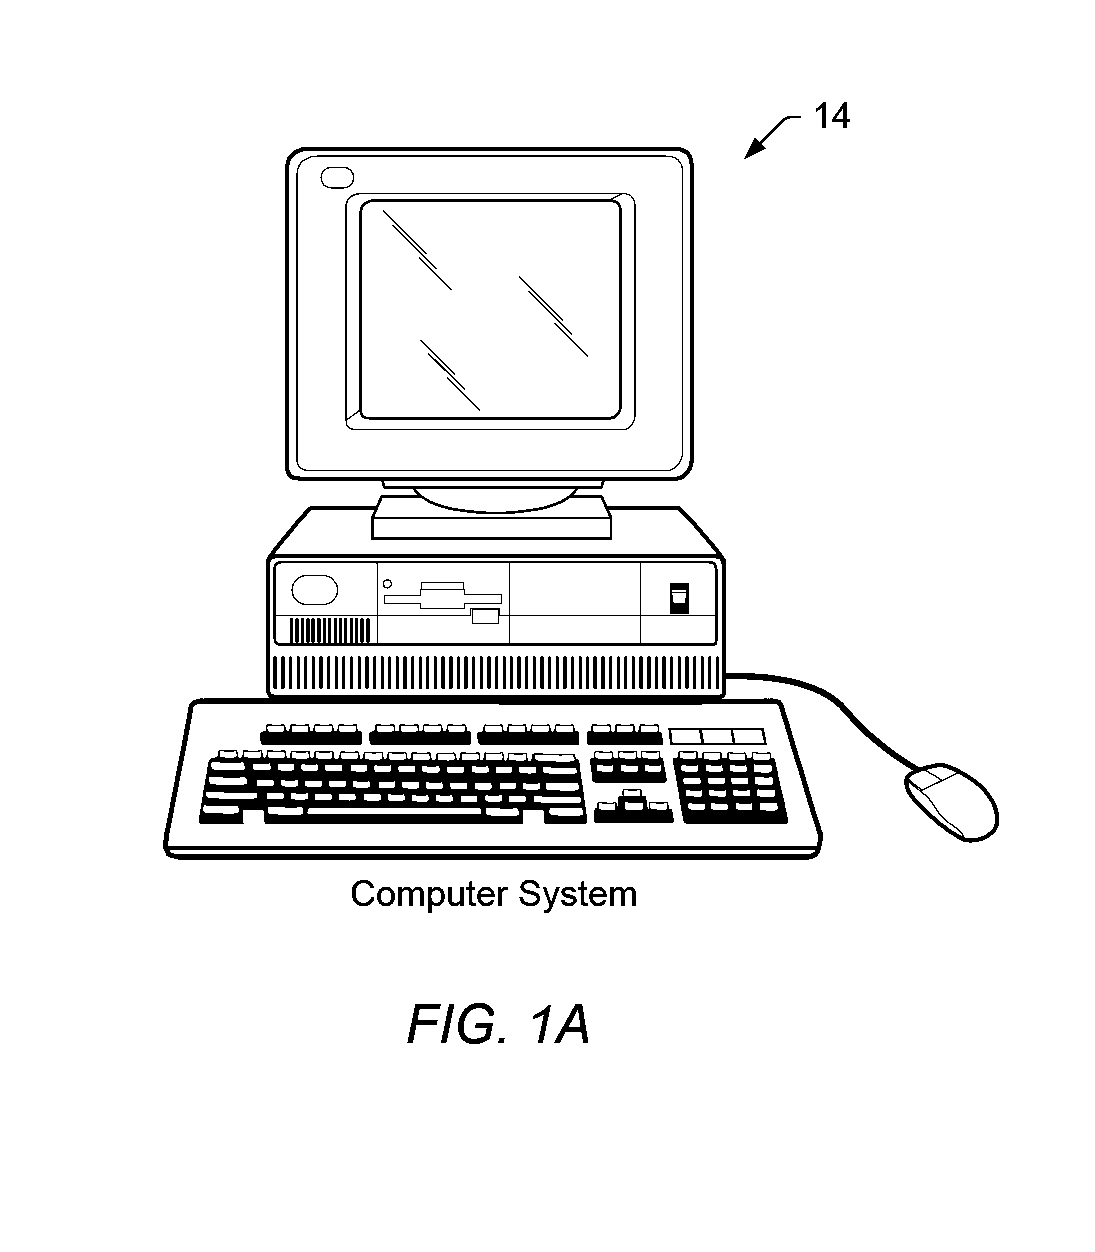 Automatically Generating a Graphical Data Flow Program Based on a Circuit Diagram